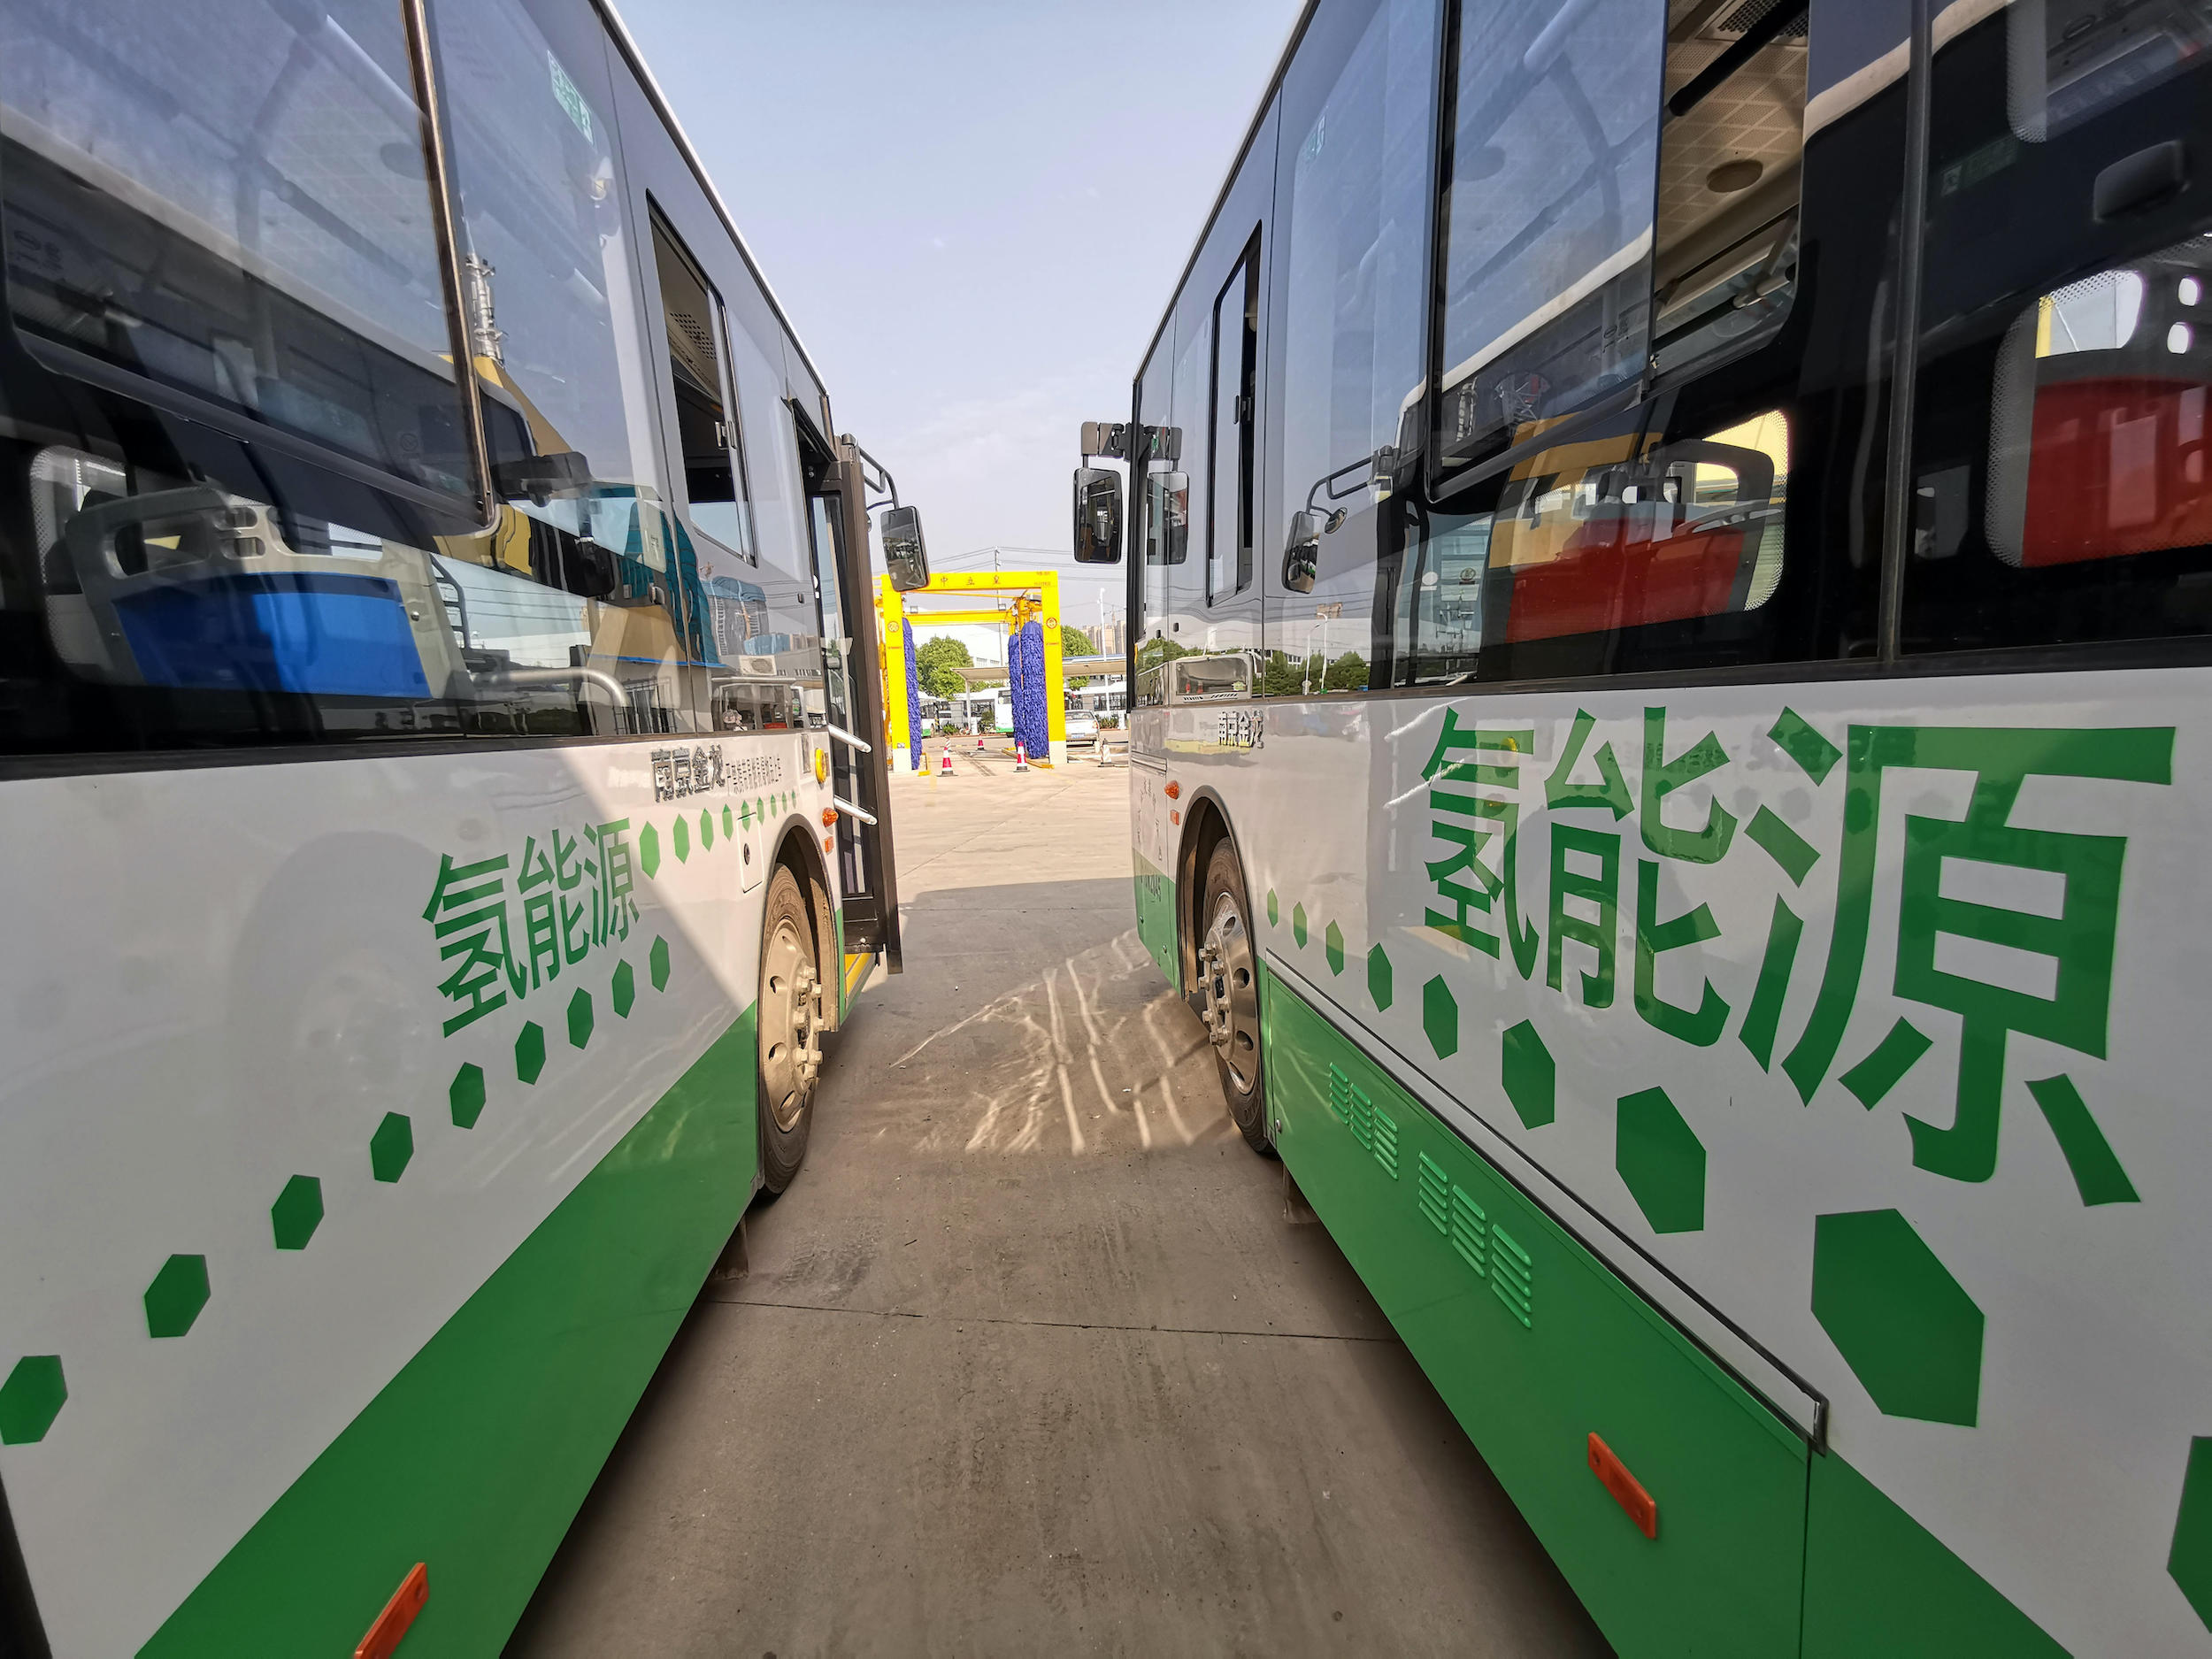 hydrogen-fuel-cell-bus-china.jpg